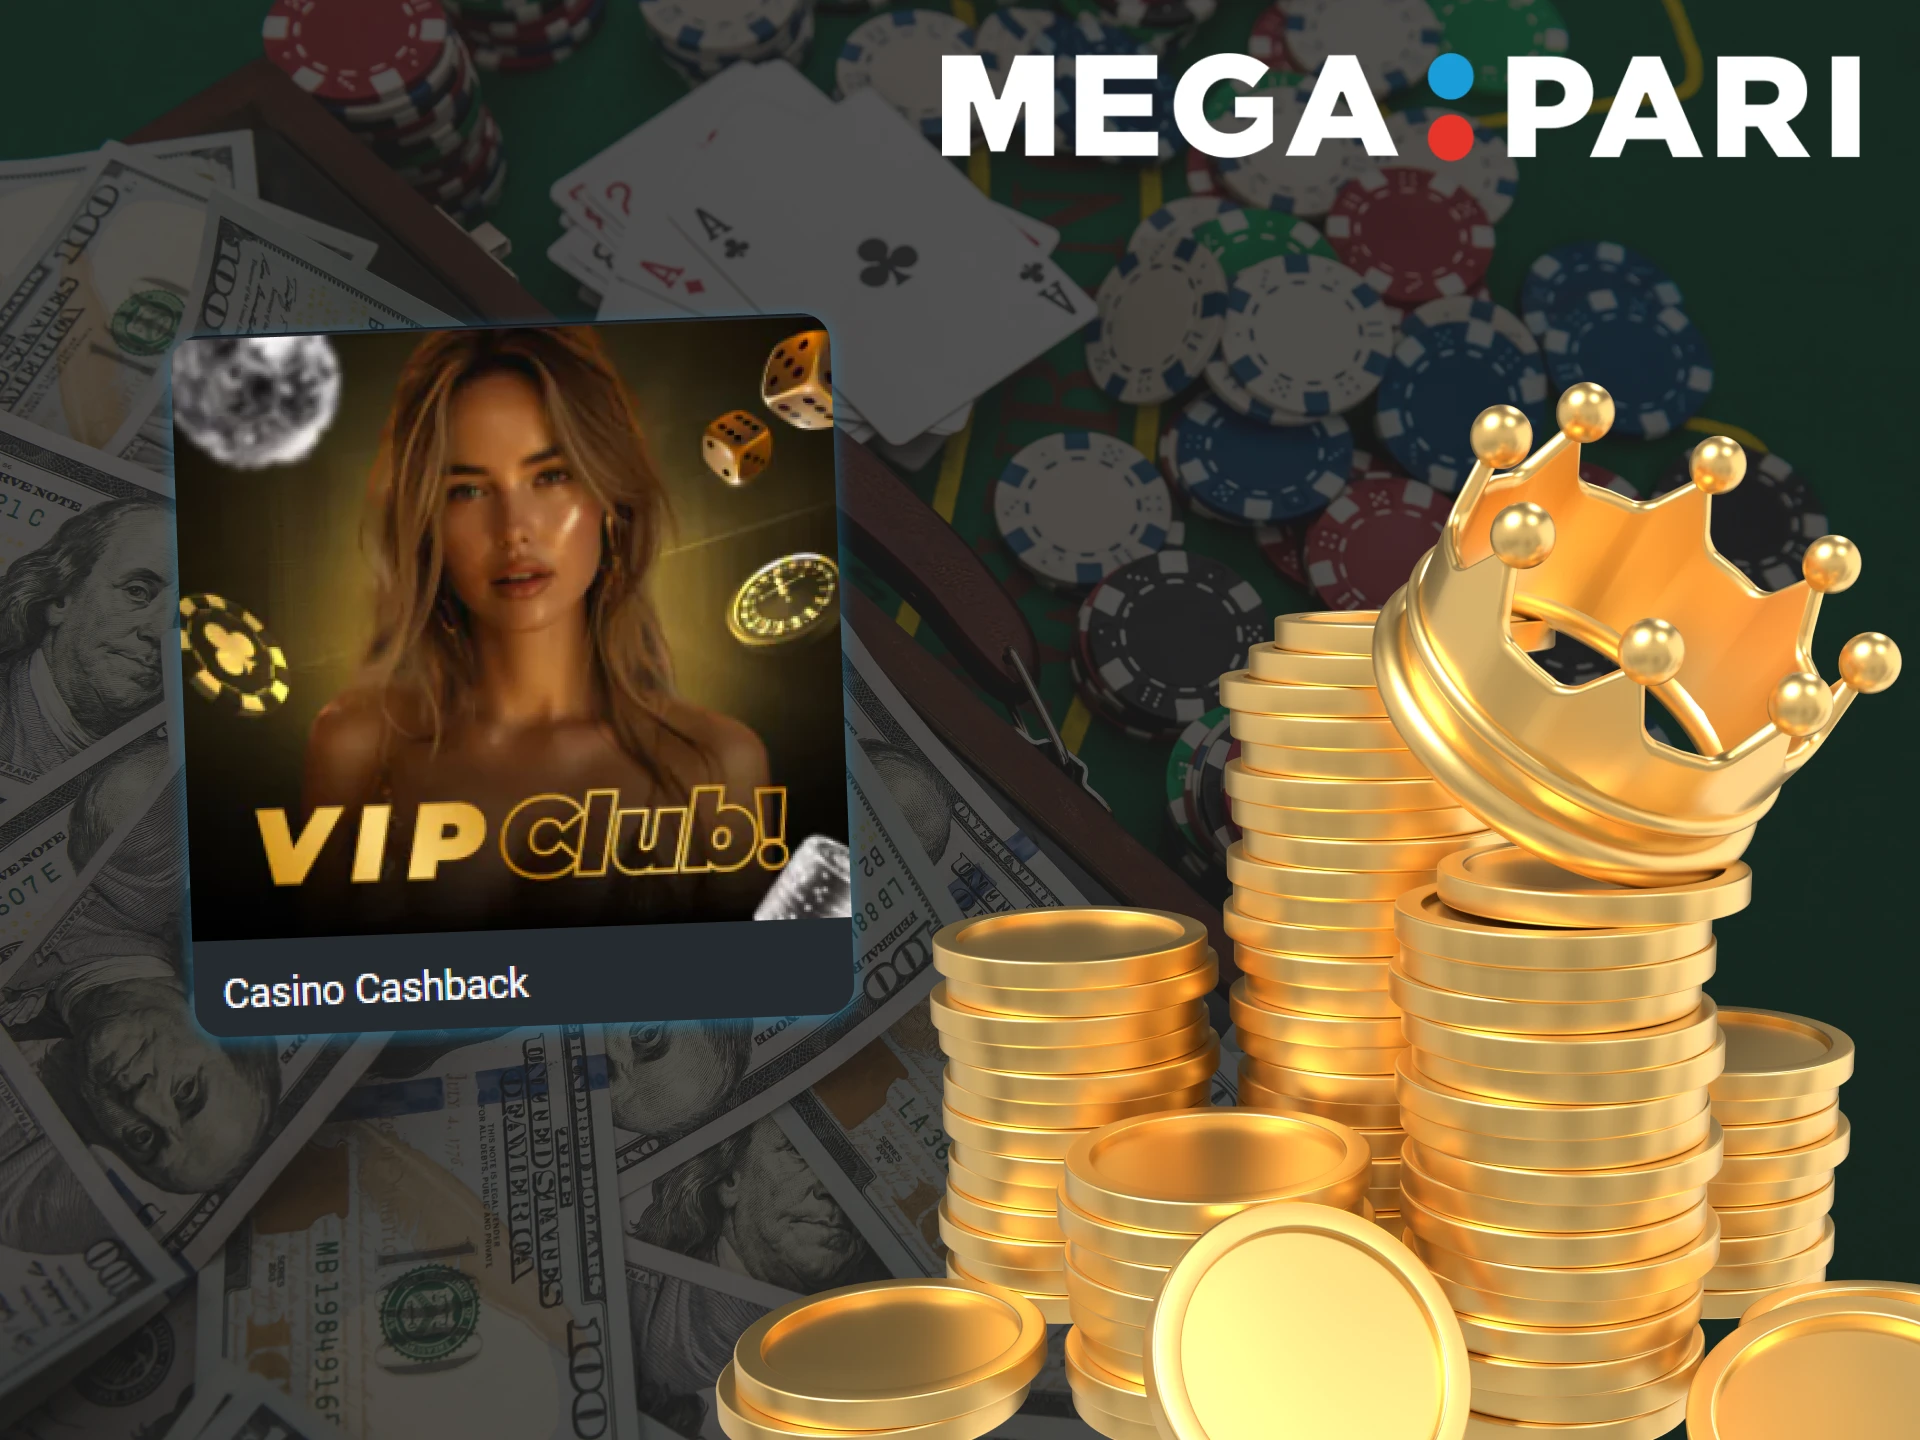 Learn how to become a member of Megapari loyalty programme and receive increased cashback from online casino games as you level up.